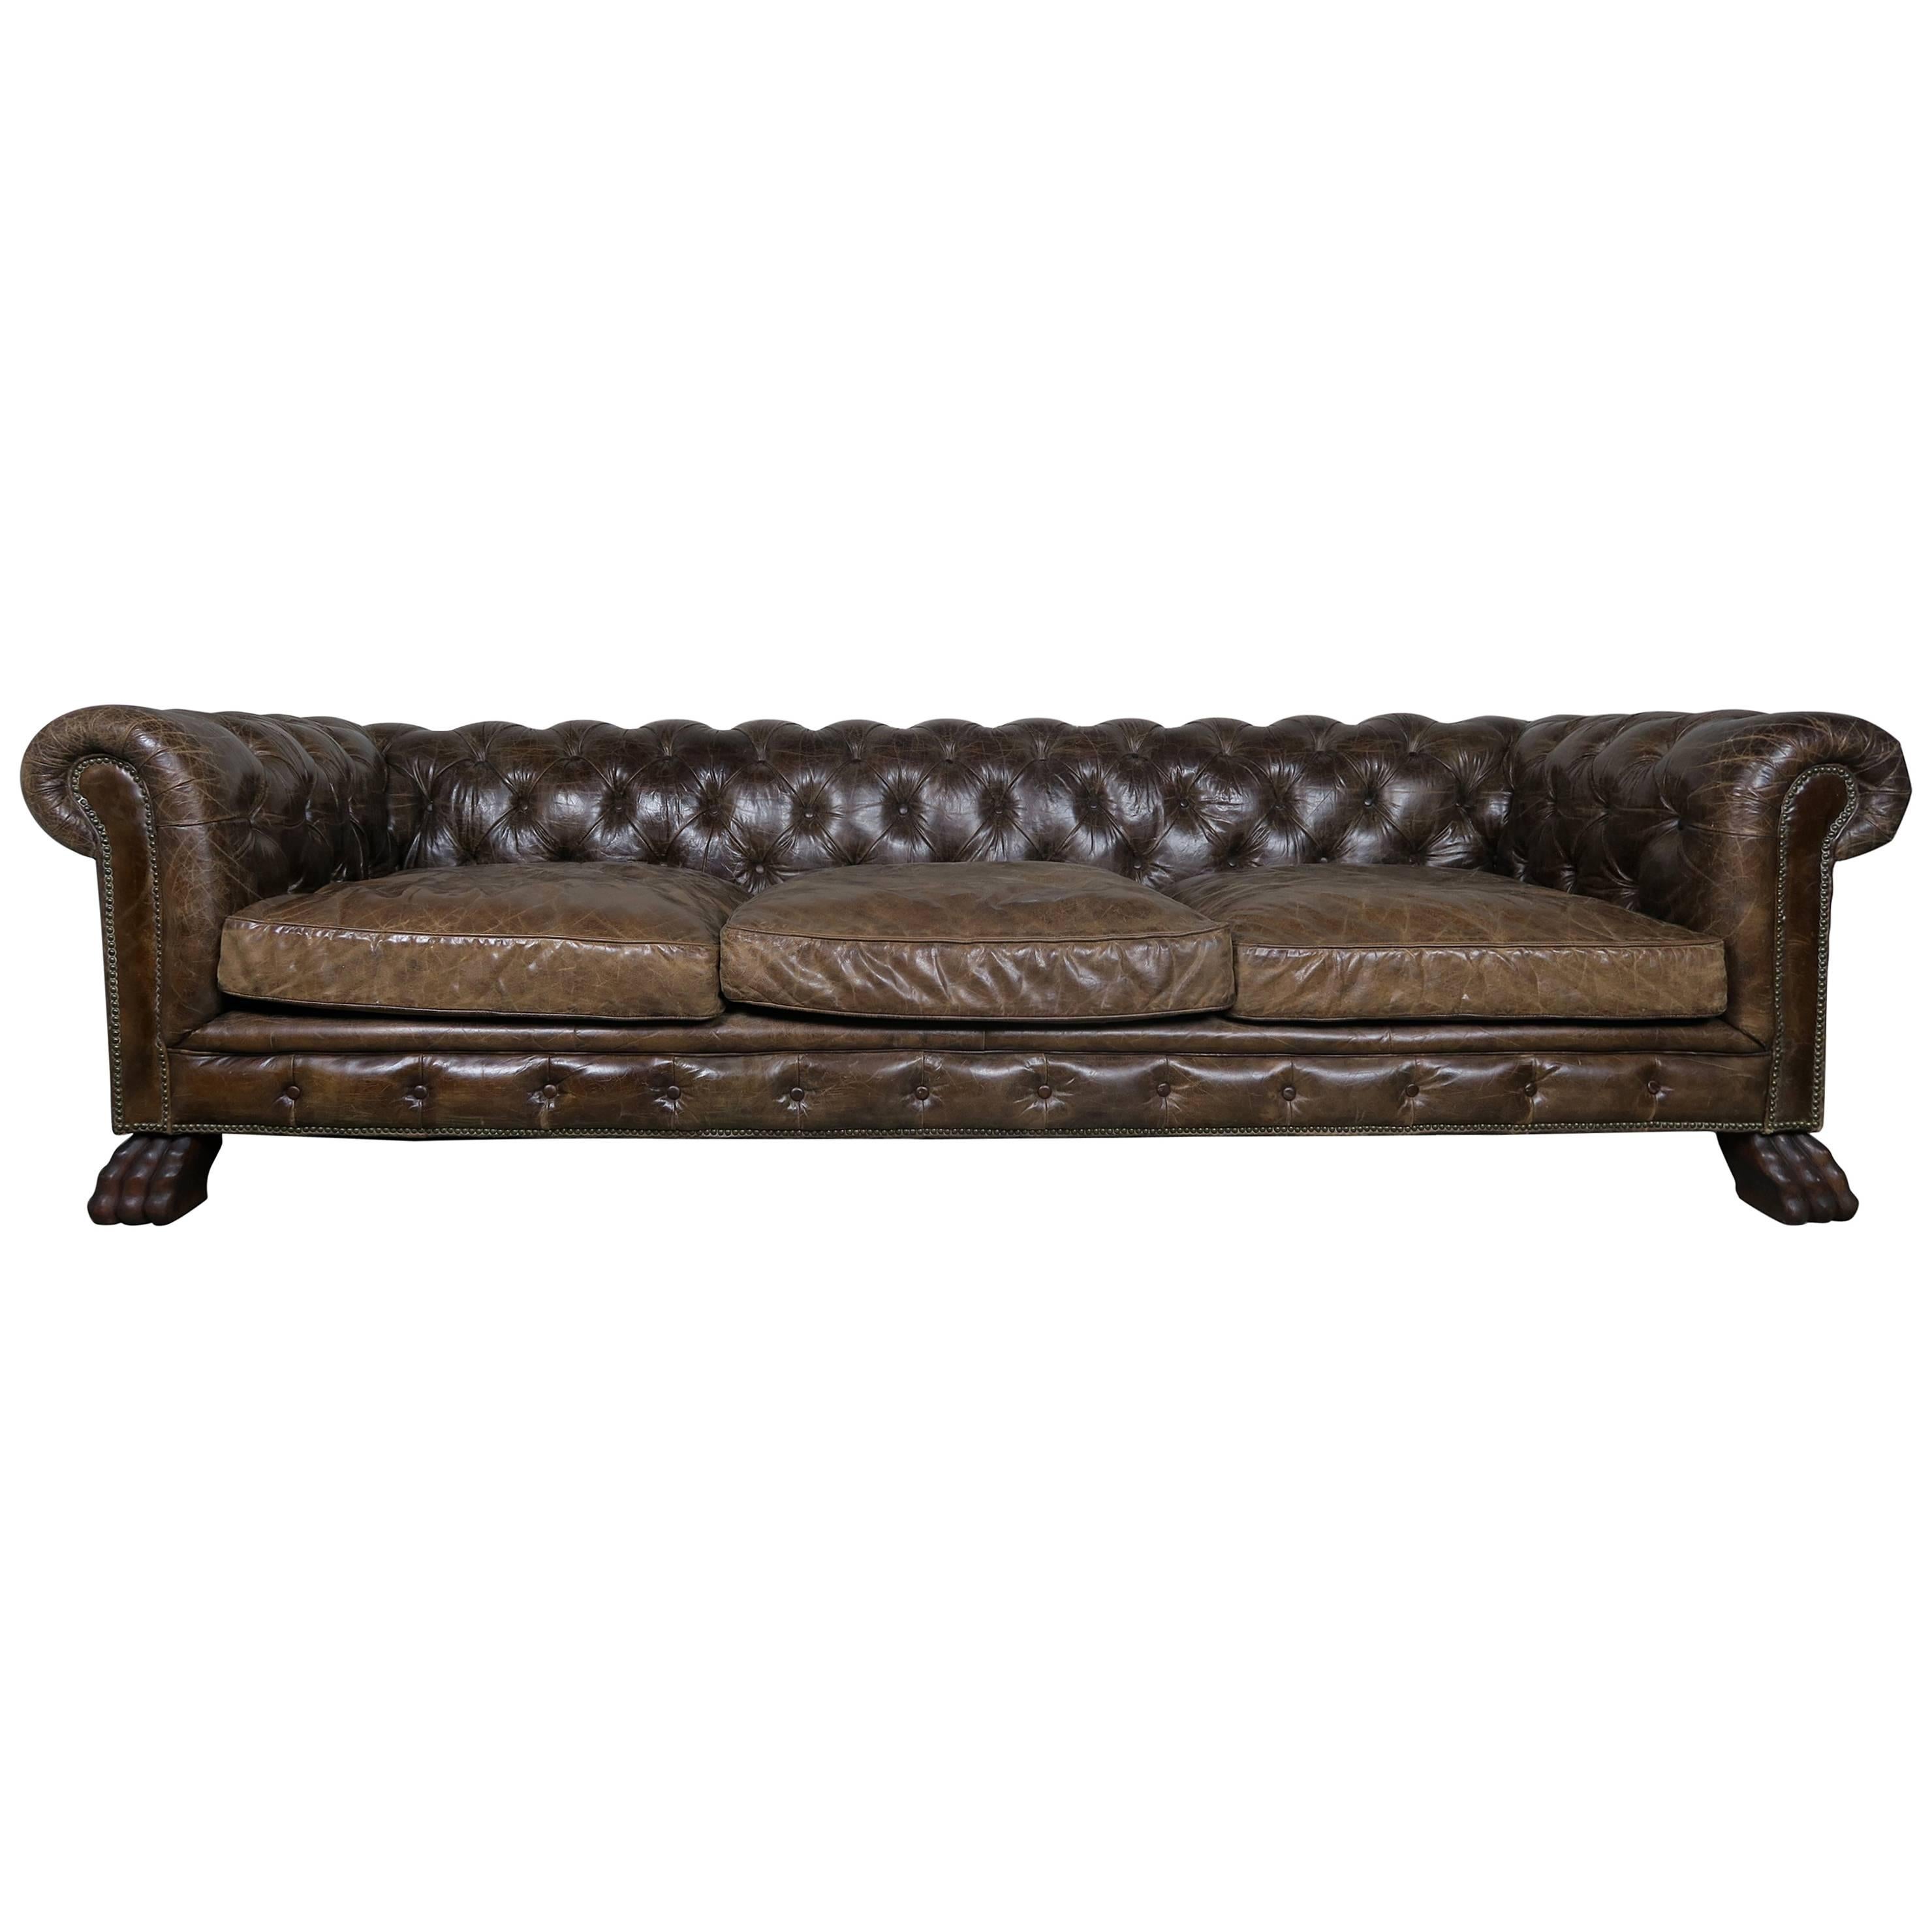 English Leather Tufted Chesterfield Style Sofa with Lion Paw Feet